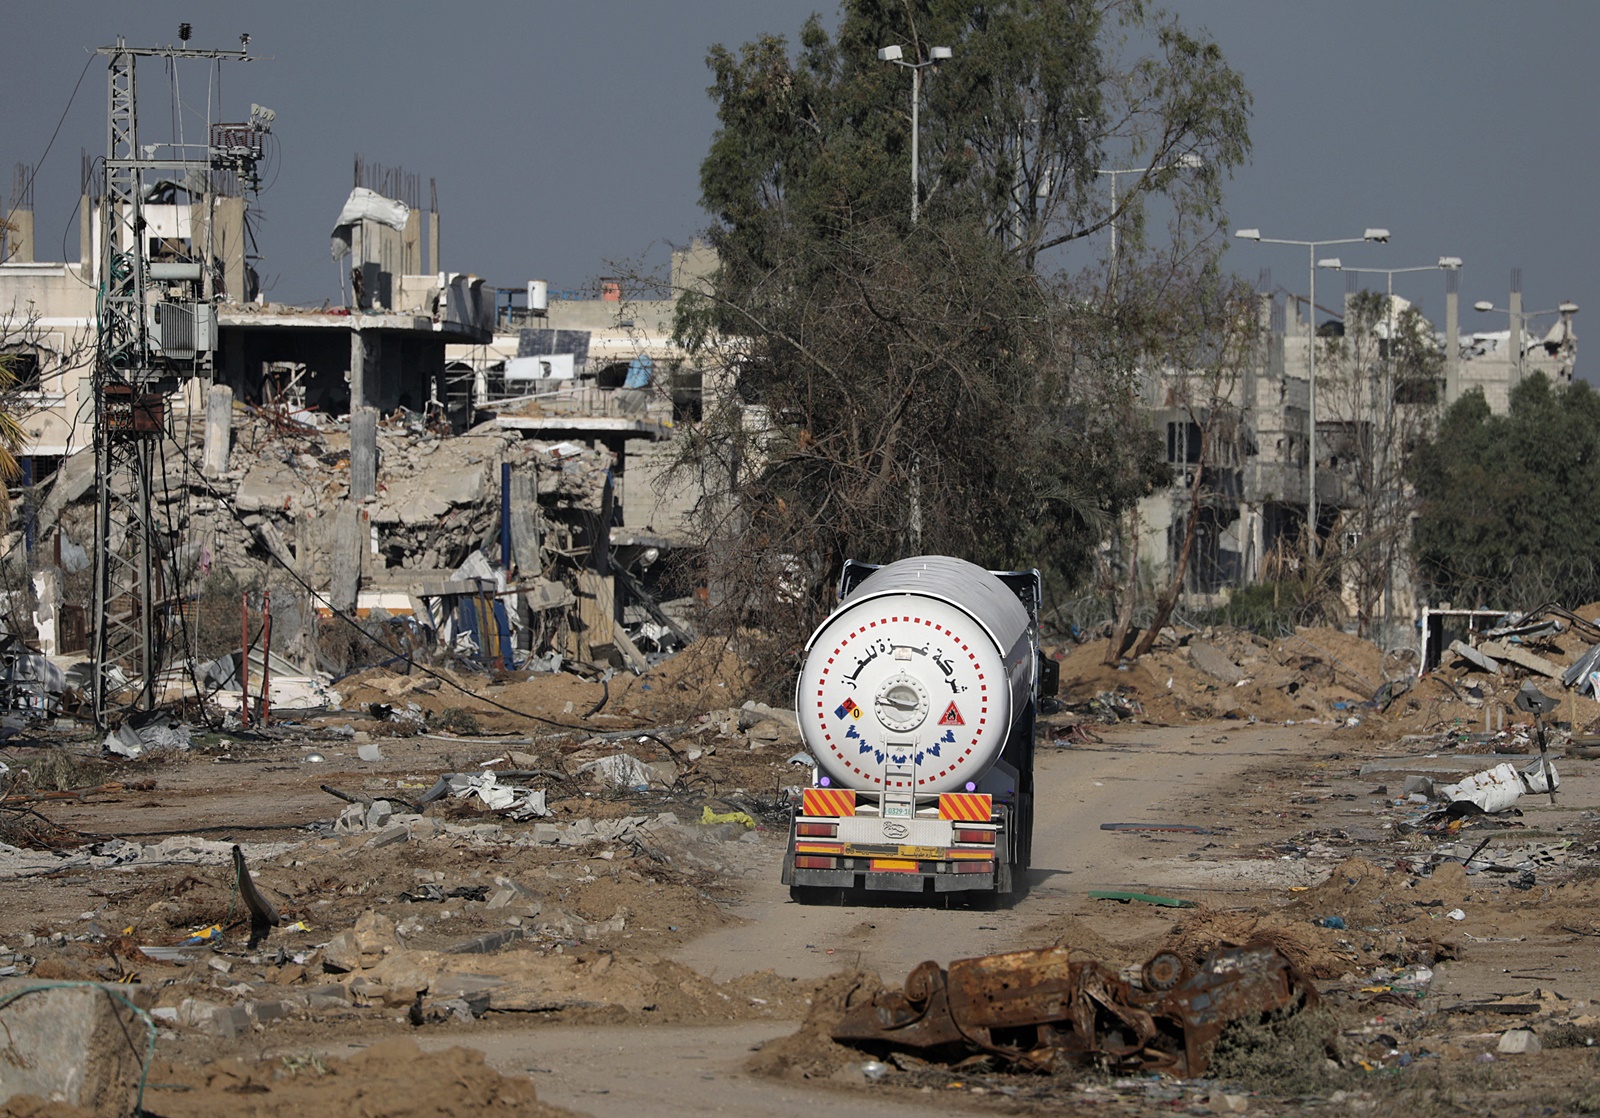 epa11001323 A fuel truck crosses from the southern Gaza Strip into the northern Gaza Strip along Salah Al Din road, in the central Gaza Strip, 29 November 2023. The four-day ceasefire agreed upon by Israel and Hamas was extended by 48 hours on 27 November, followed by more talks about a possible further extension. The Israeli army on 29 November has reissued its daily message to the residents of Gaza to avoid moving back into northern Gaza which is considered a “war zone", to not approach within one kilometer of the border and to not access the sea.  EPA/MOHAMMED SABER